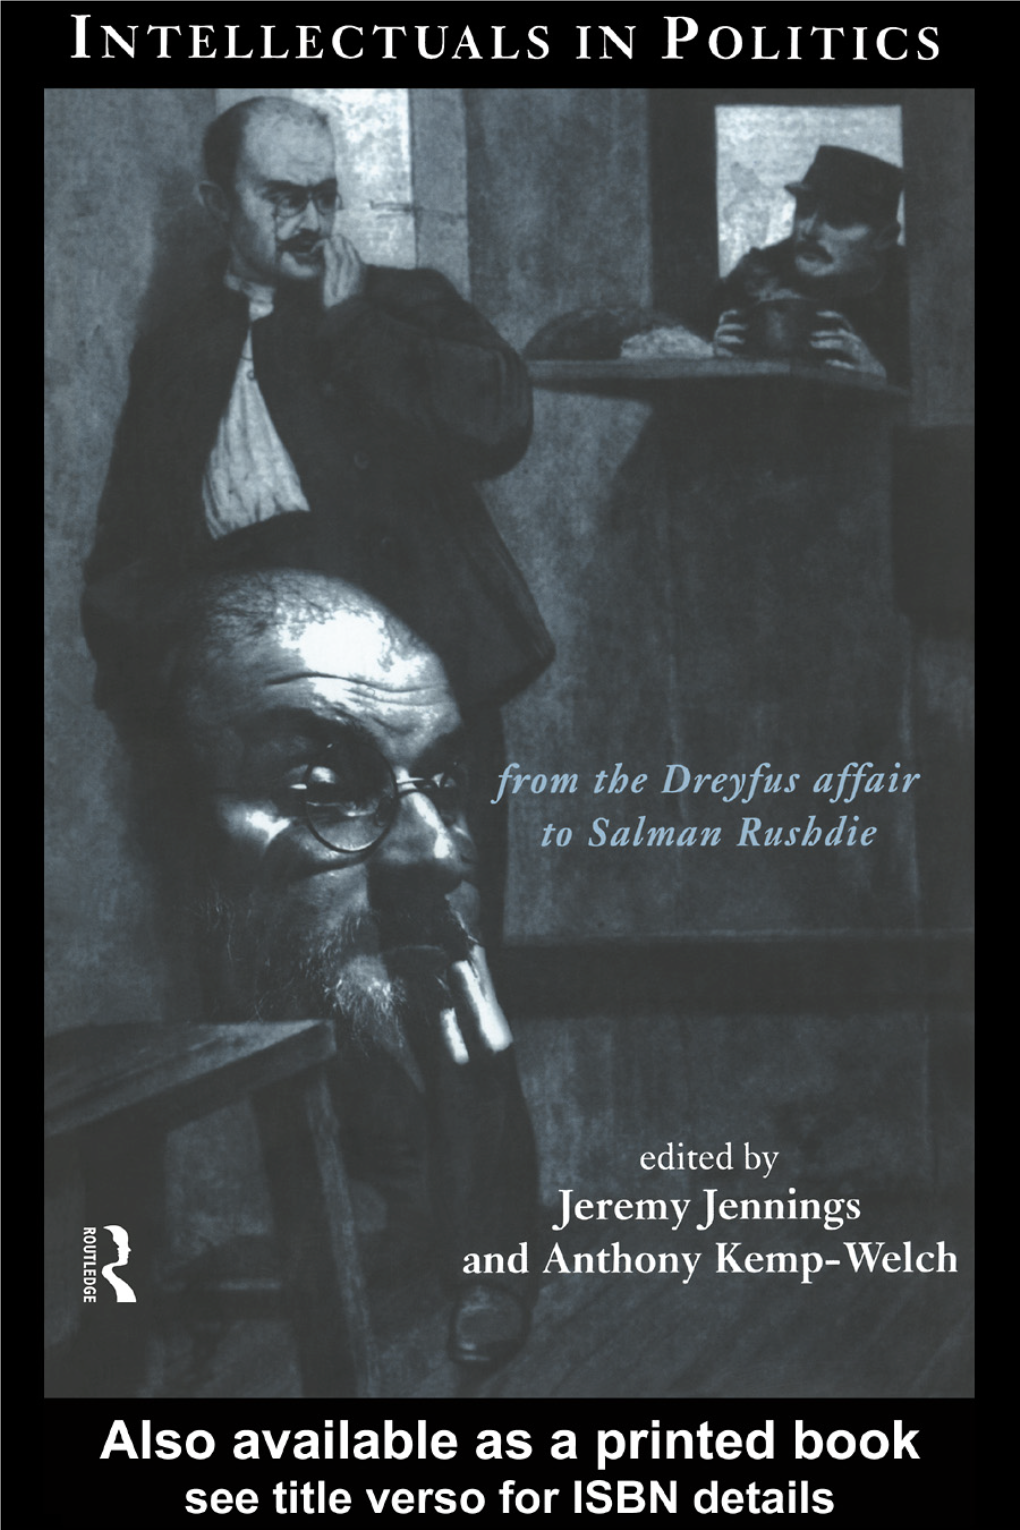 Intellectuals in Politics: from the Dreyfus Affair to Salman Rushdie/Edited by Jeremy Jennings and Anthony Kemp-Welch